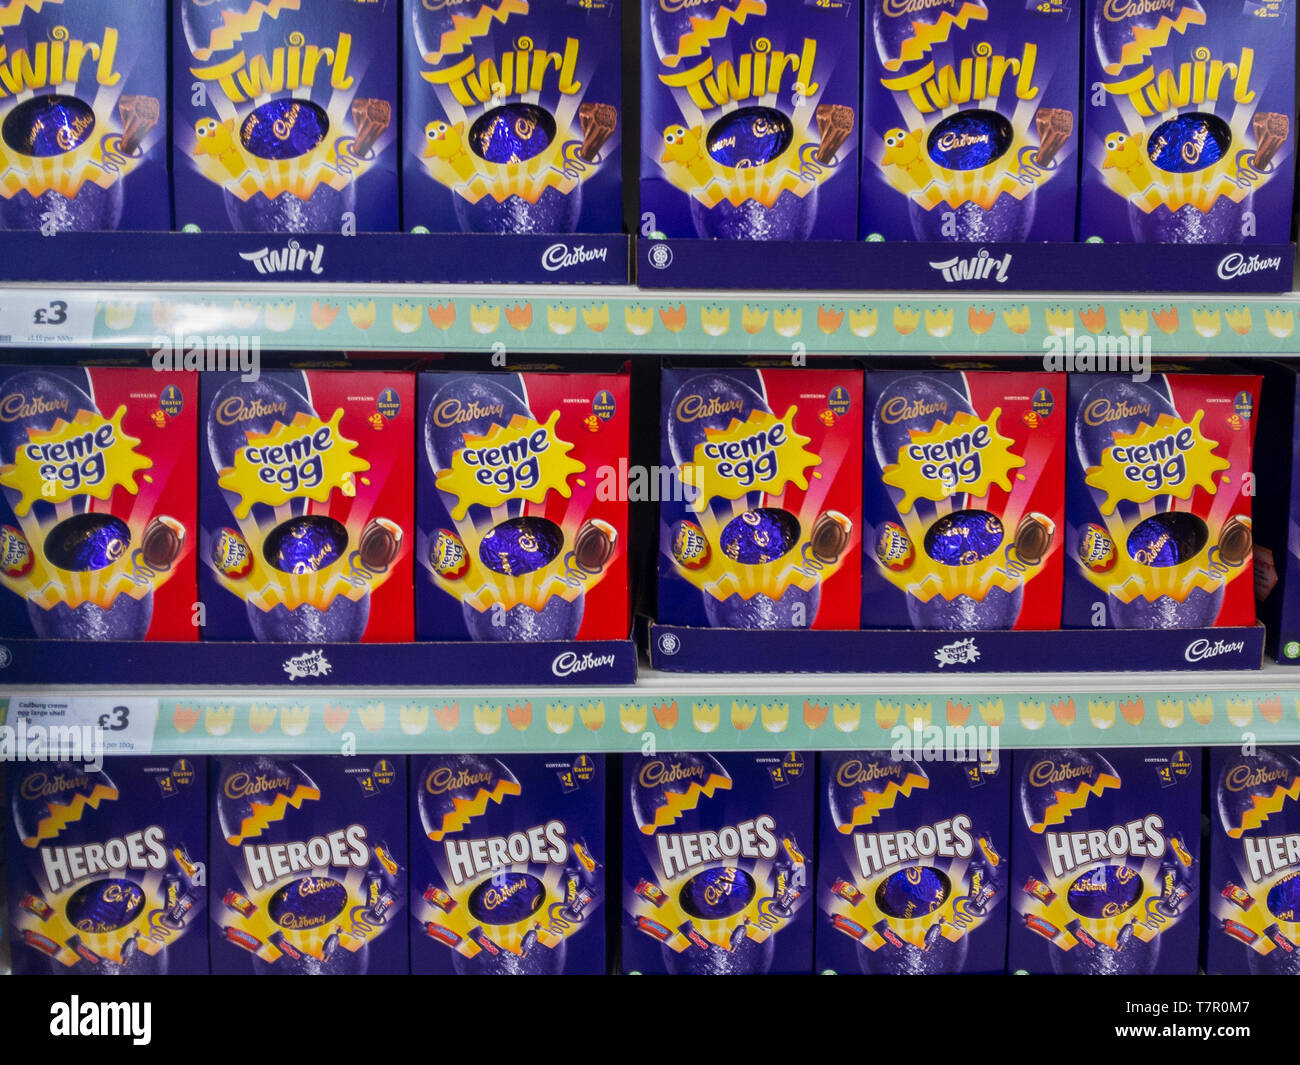 Exeter, Devon , England, March, 14, 2019: A UK supermarket filled shelves selling chocolate Easter Eggs. Lots of purple and red in the image, horizontal aspect Stock Photo